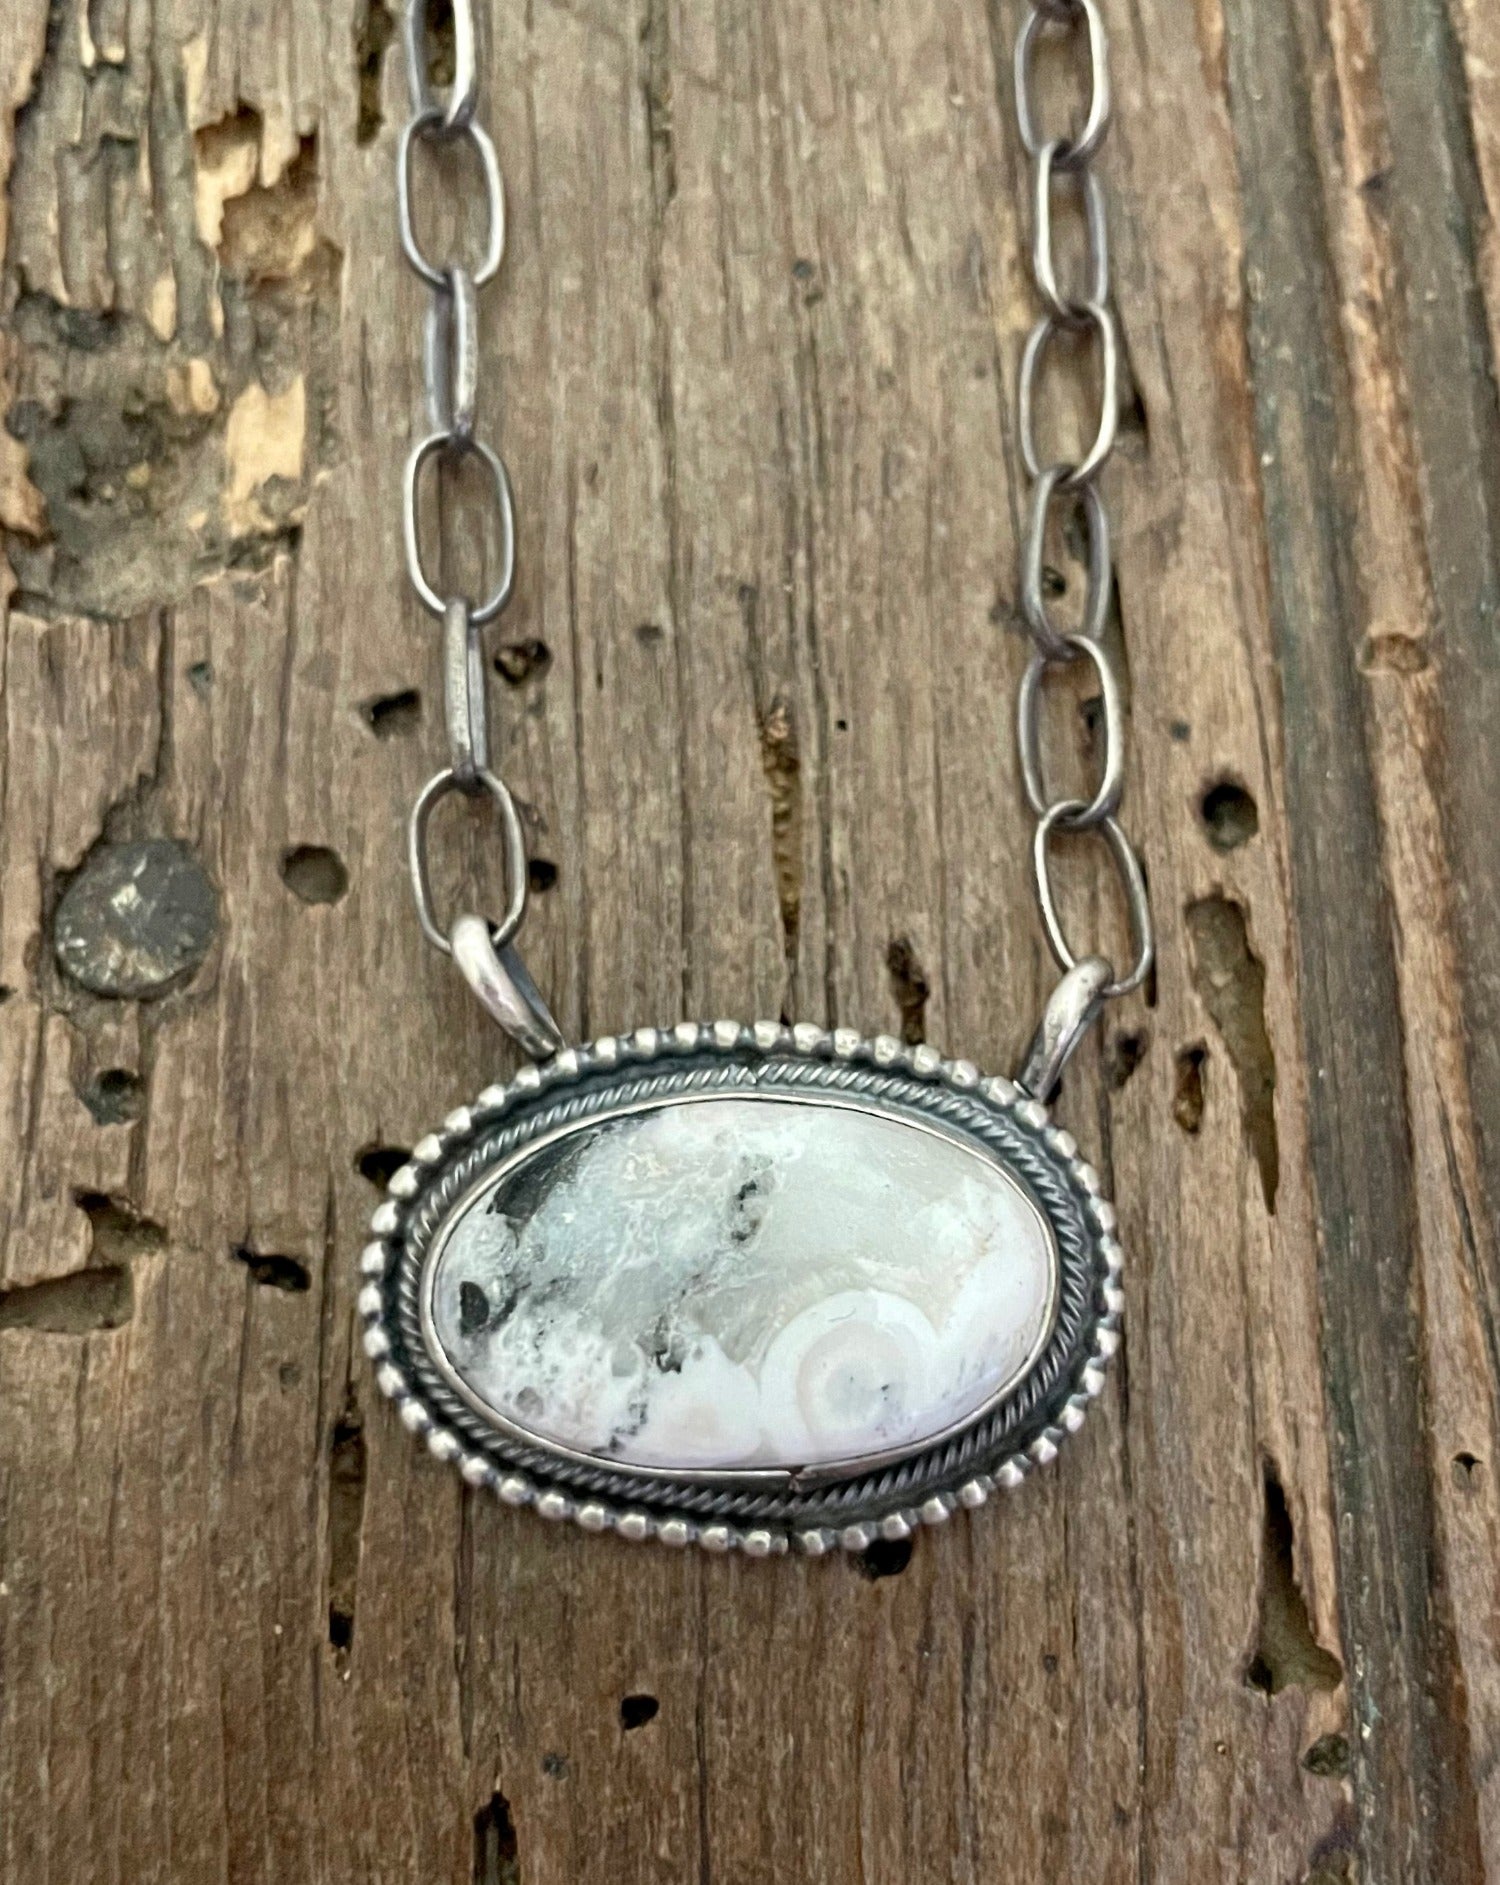 Close up shot of White Buffalo stone in necklace